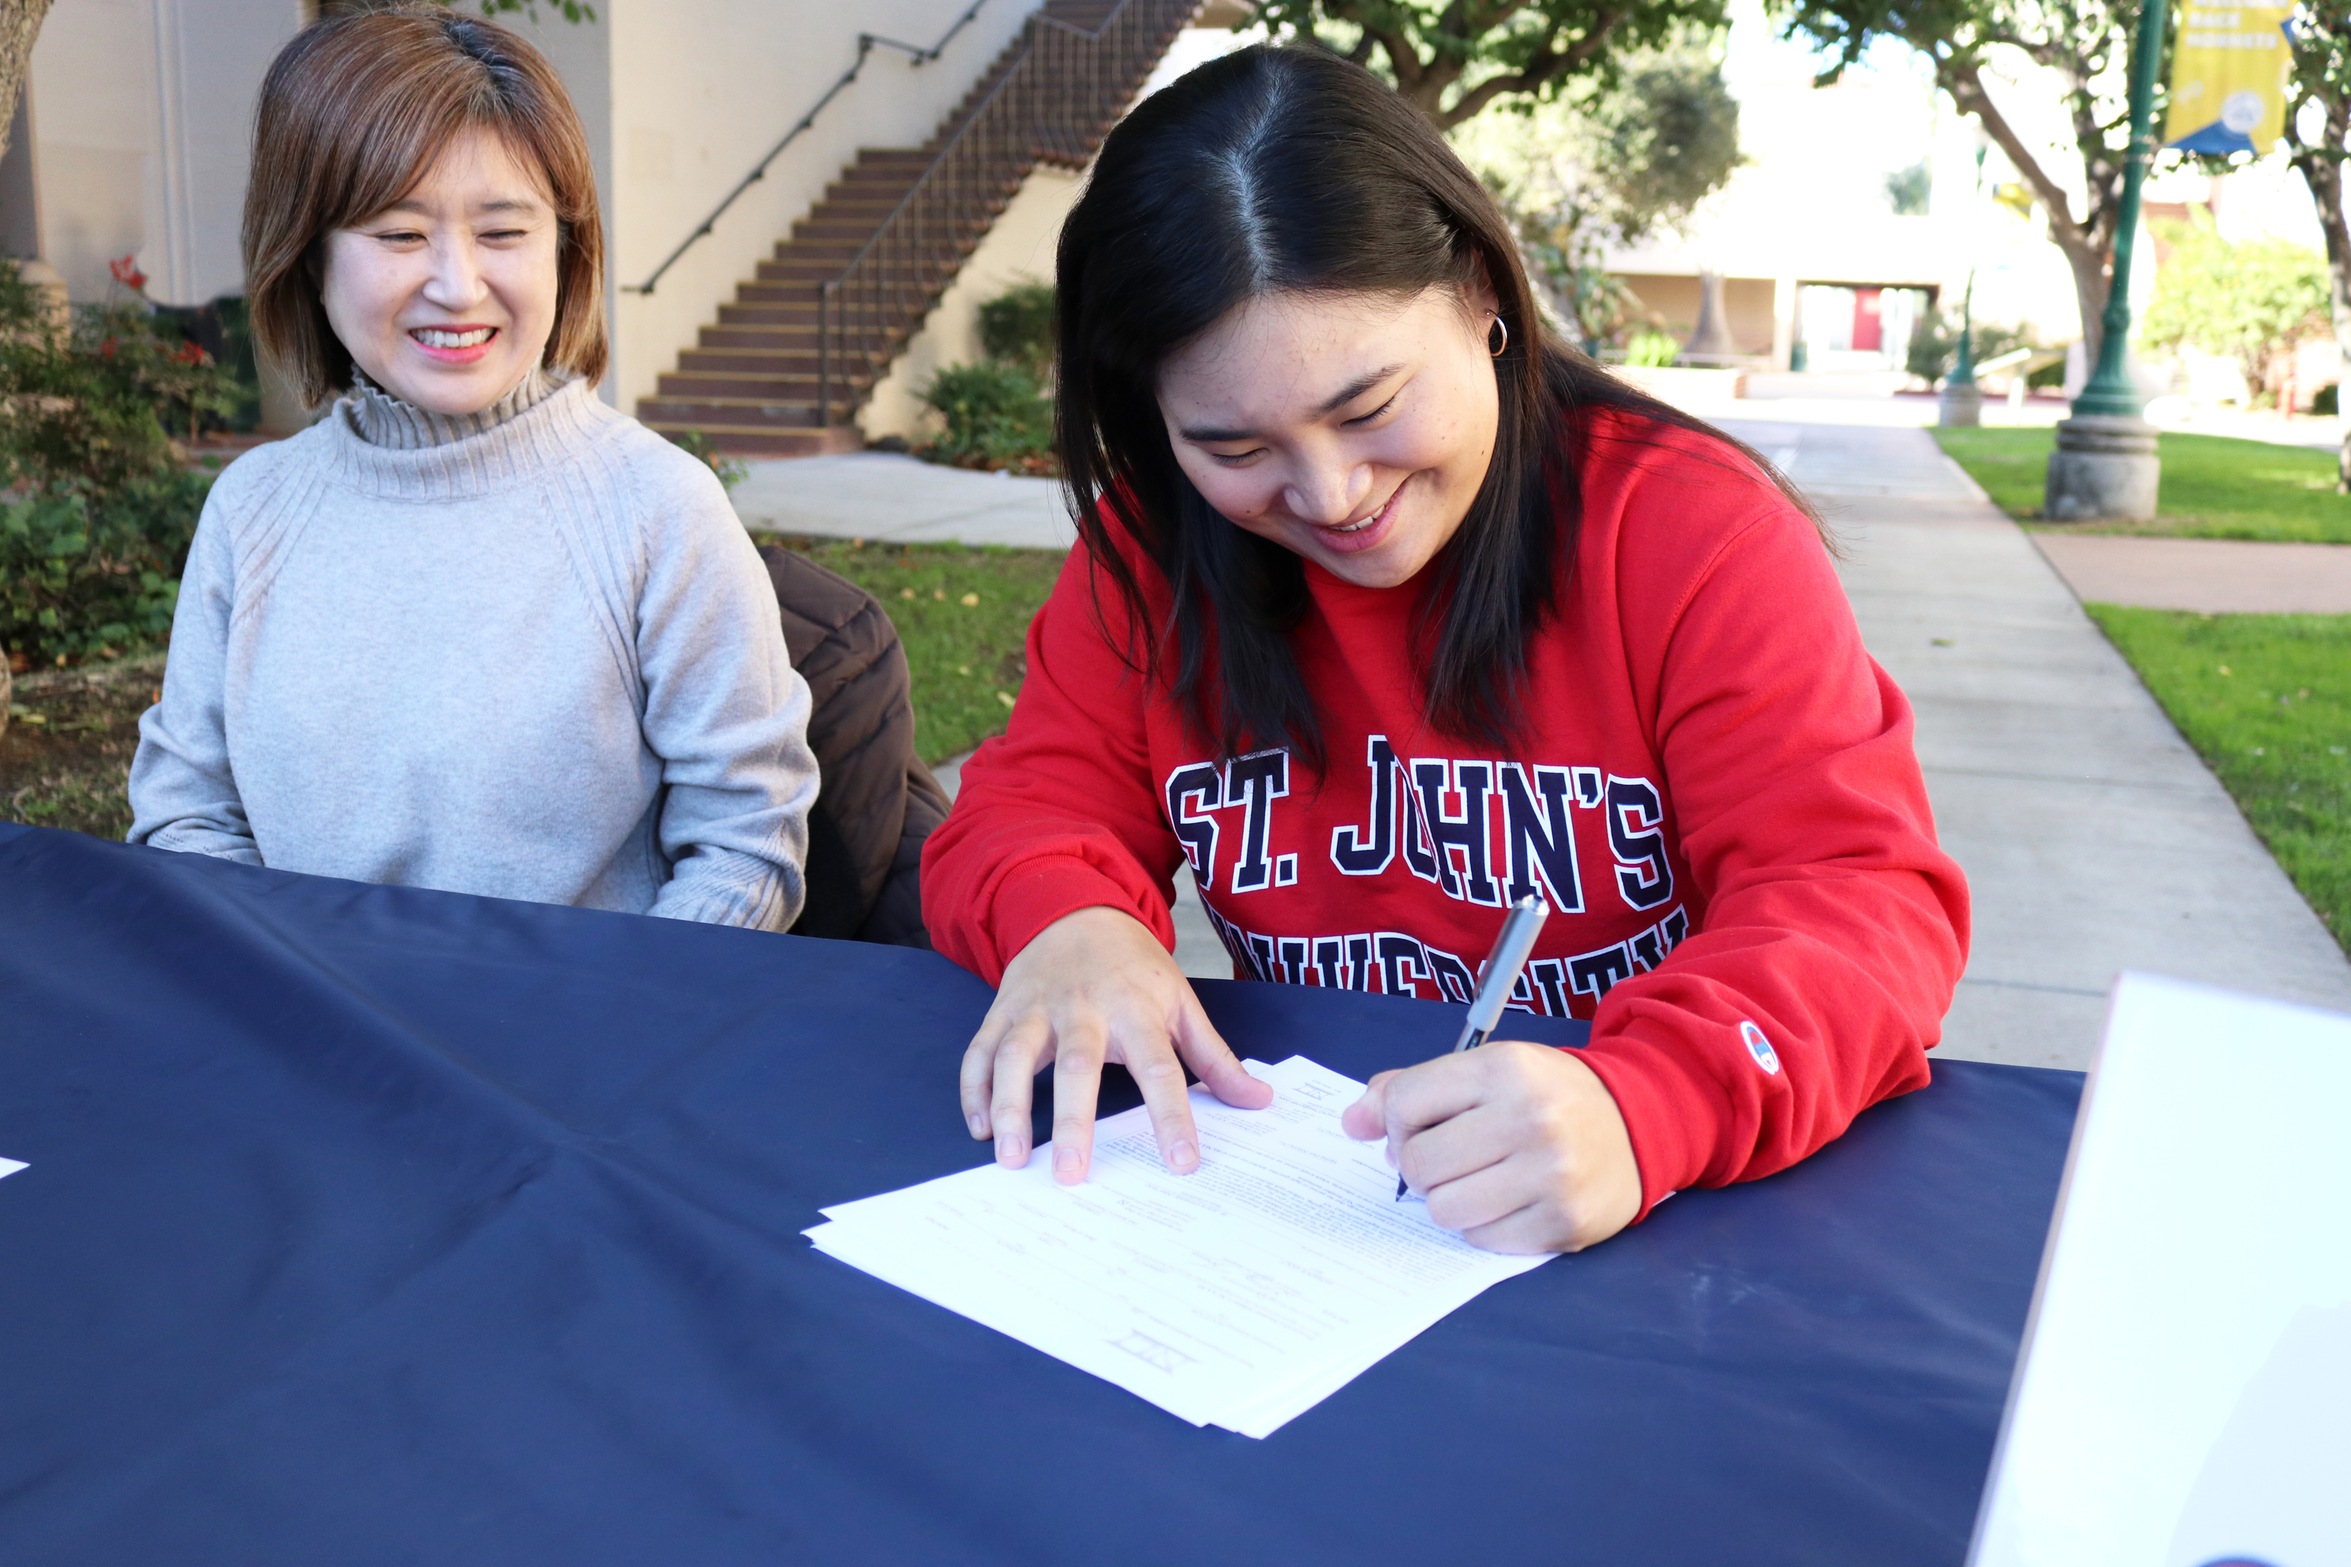 NEW YORK BOUND! LEE SIGNS WITH ST. JOHN'S